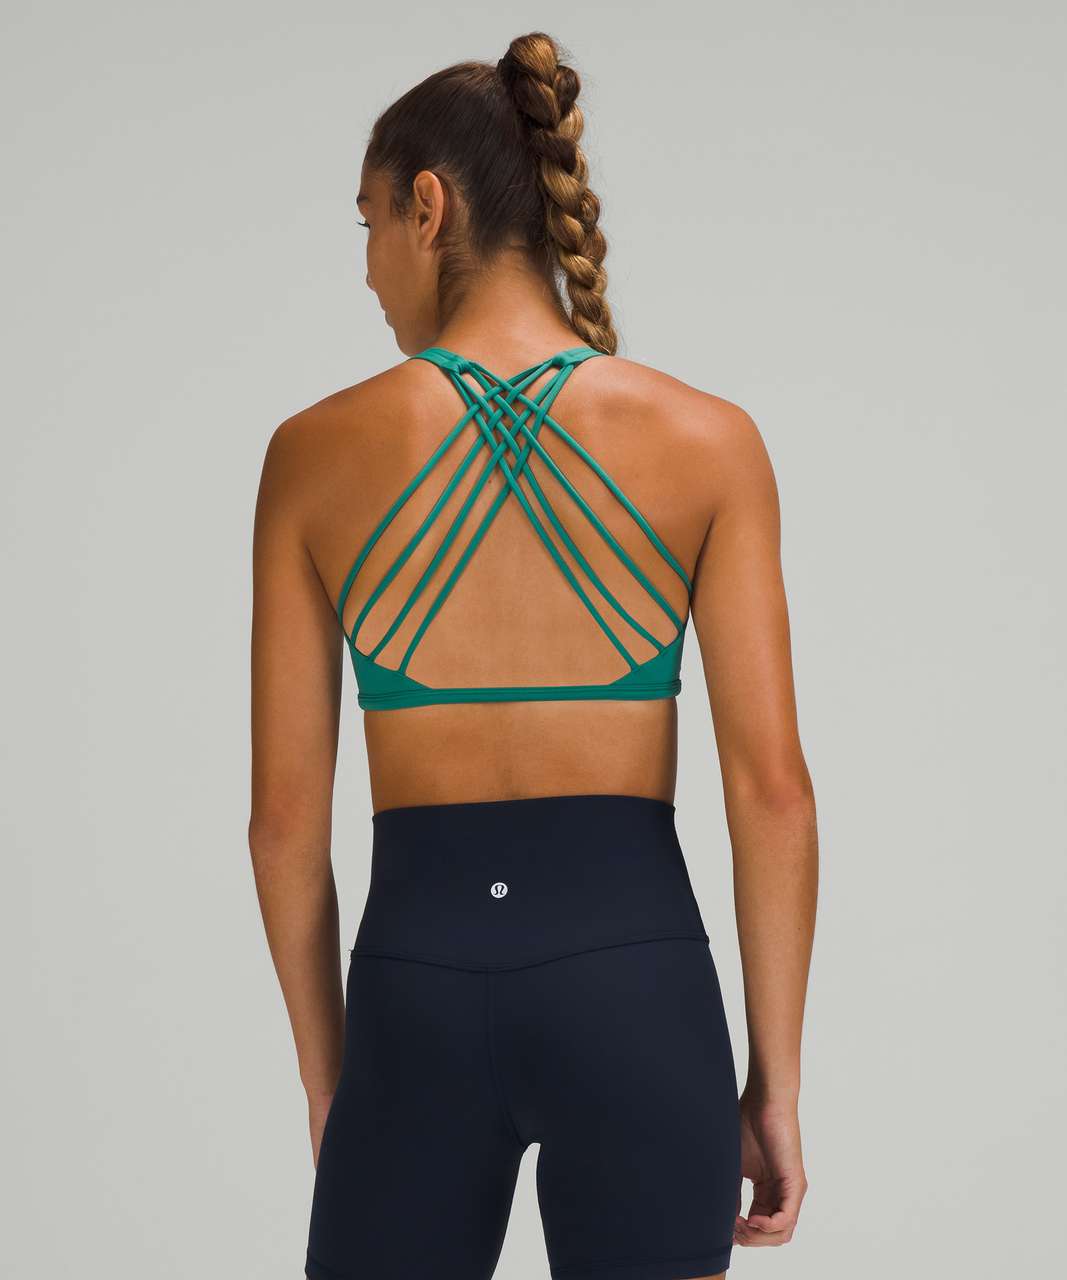 Lululemon Free to Be Bra - Wild *Light Support, A/B Cup - Teal Lagoon